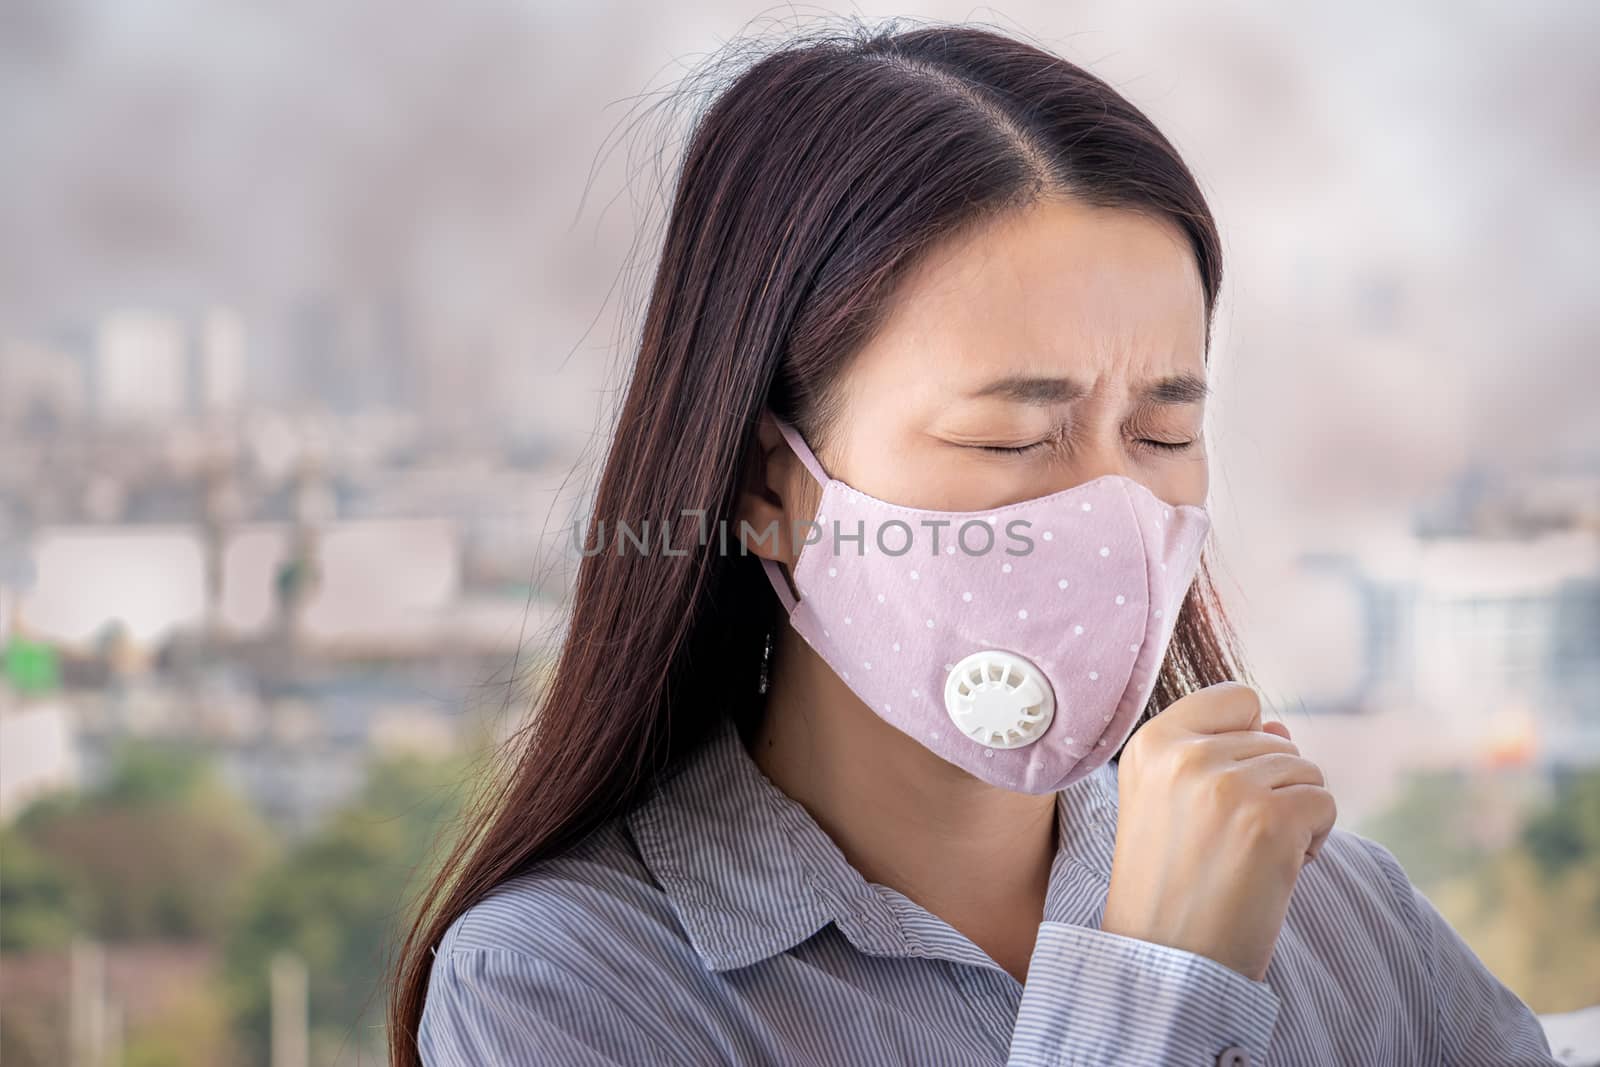 PM2.5. people feeling sick from air pollution, environment has h by asiandelight